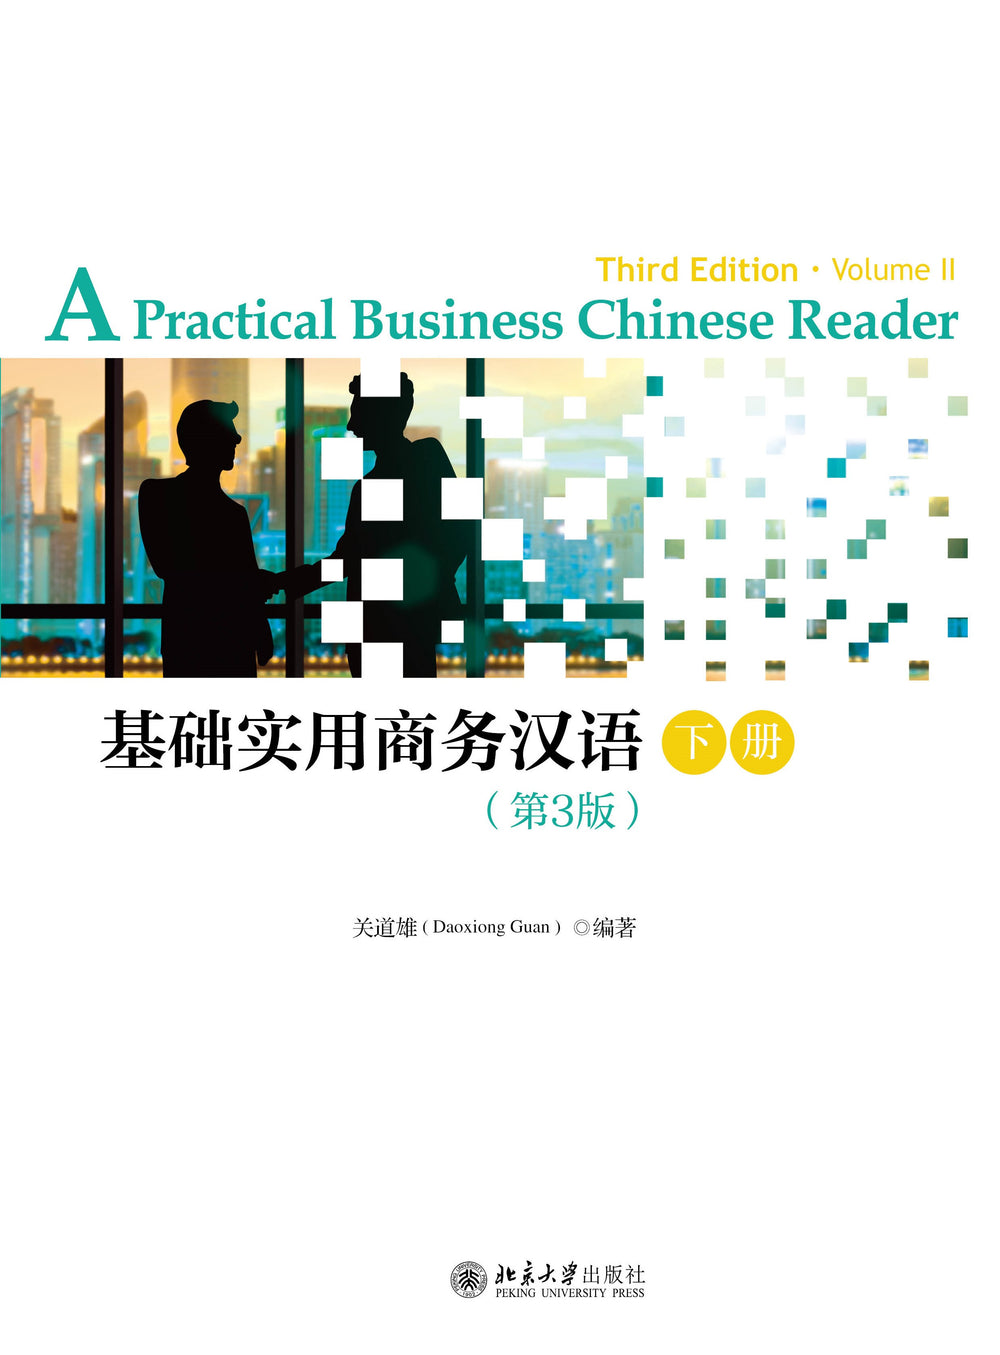 A Practical Business Chinese Reader (3rd Edition) 基础实用商务汉语（第3版）